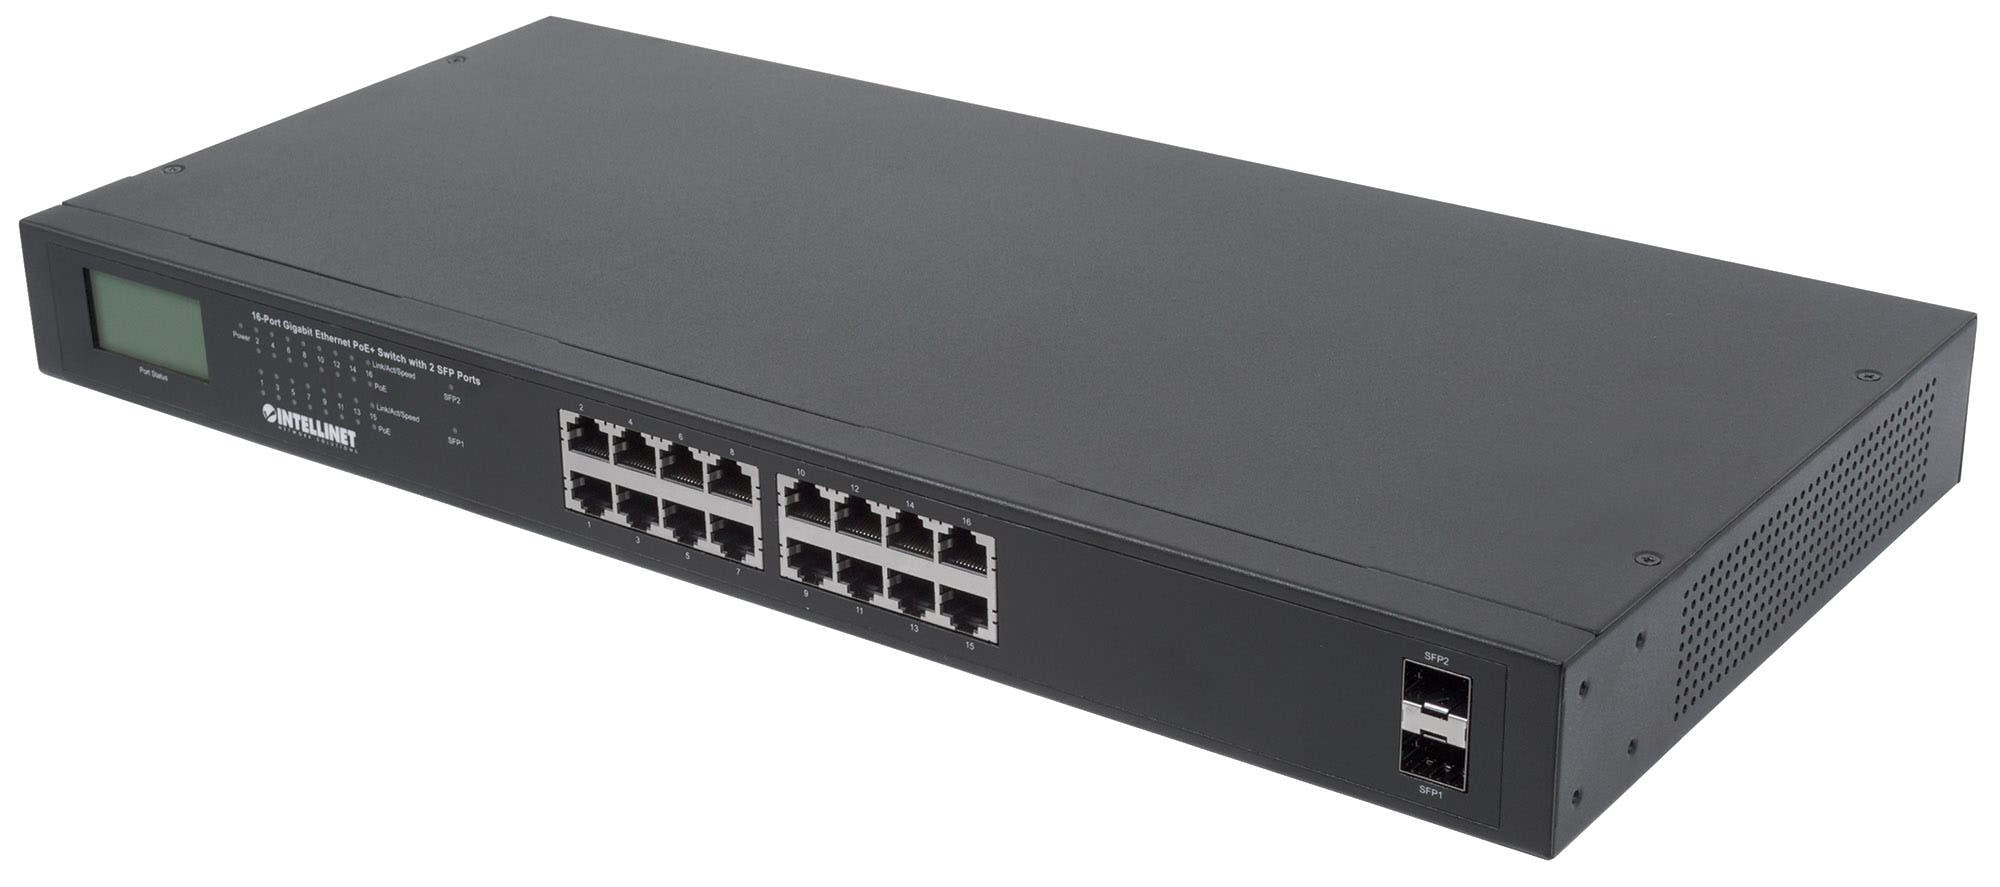 Intellinet 16-Port Gigabit Ethernet PoE+ Switch with 2 SFP Ports, LCD Display, IEEE 802.3at/af Power over Ethernet (PoE+/PoE) Compliant, 370 W, Endspan, 19" Rackmount (UK Power Cord)